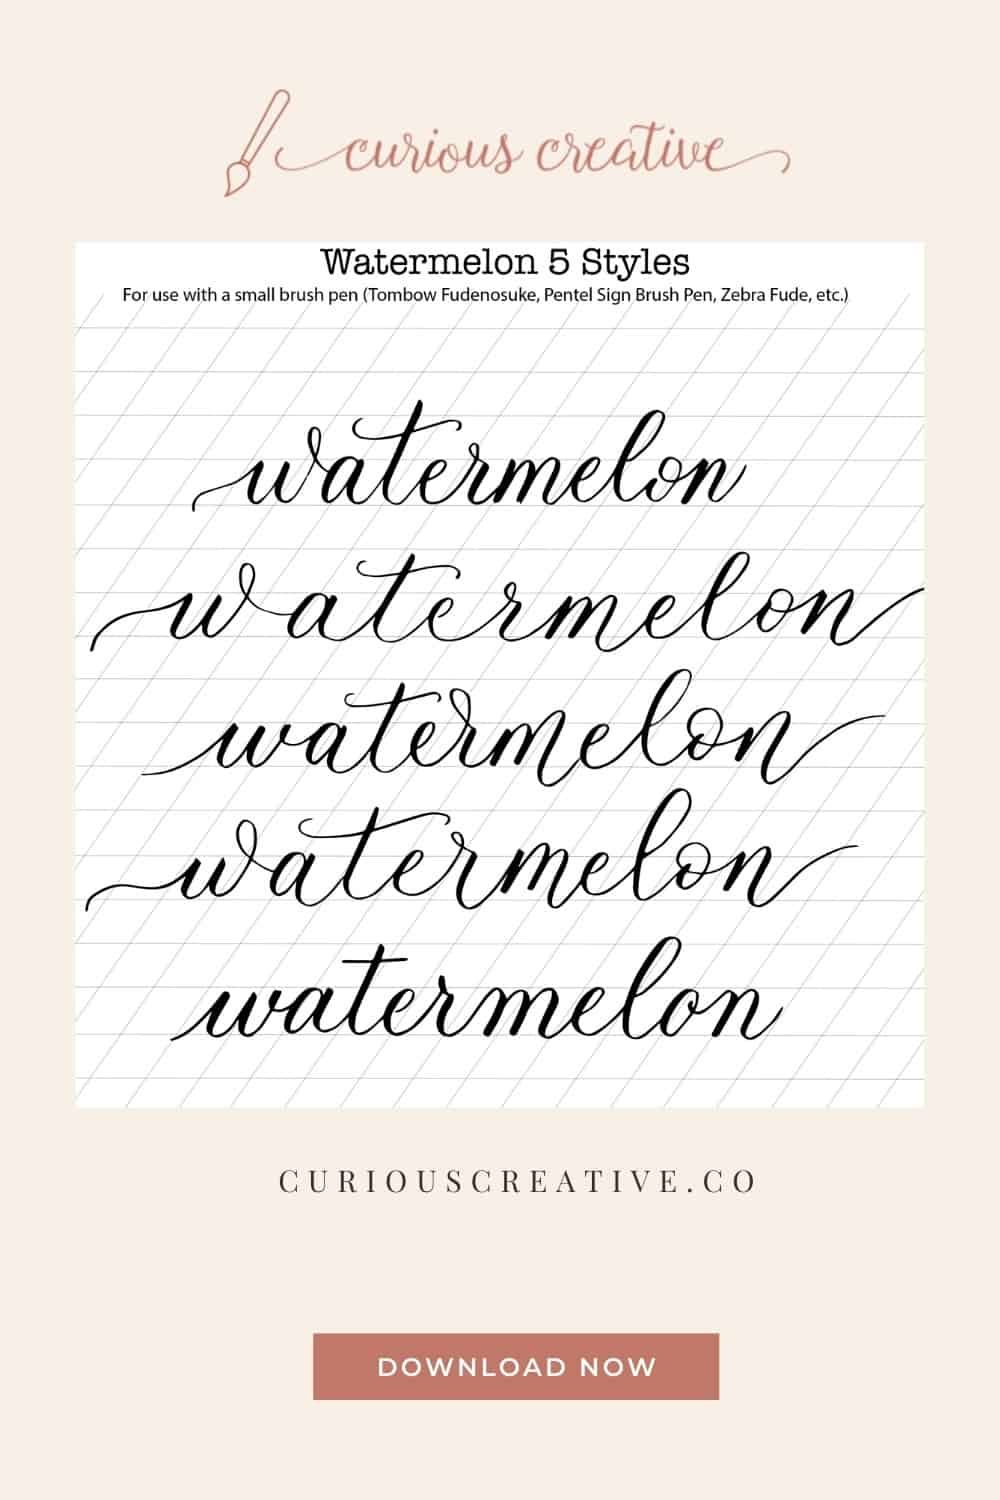 Explore 5 calligraphy styles using word watermelon